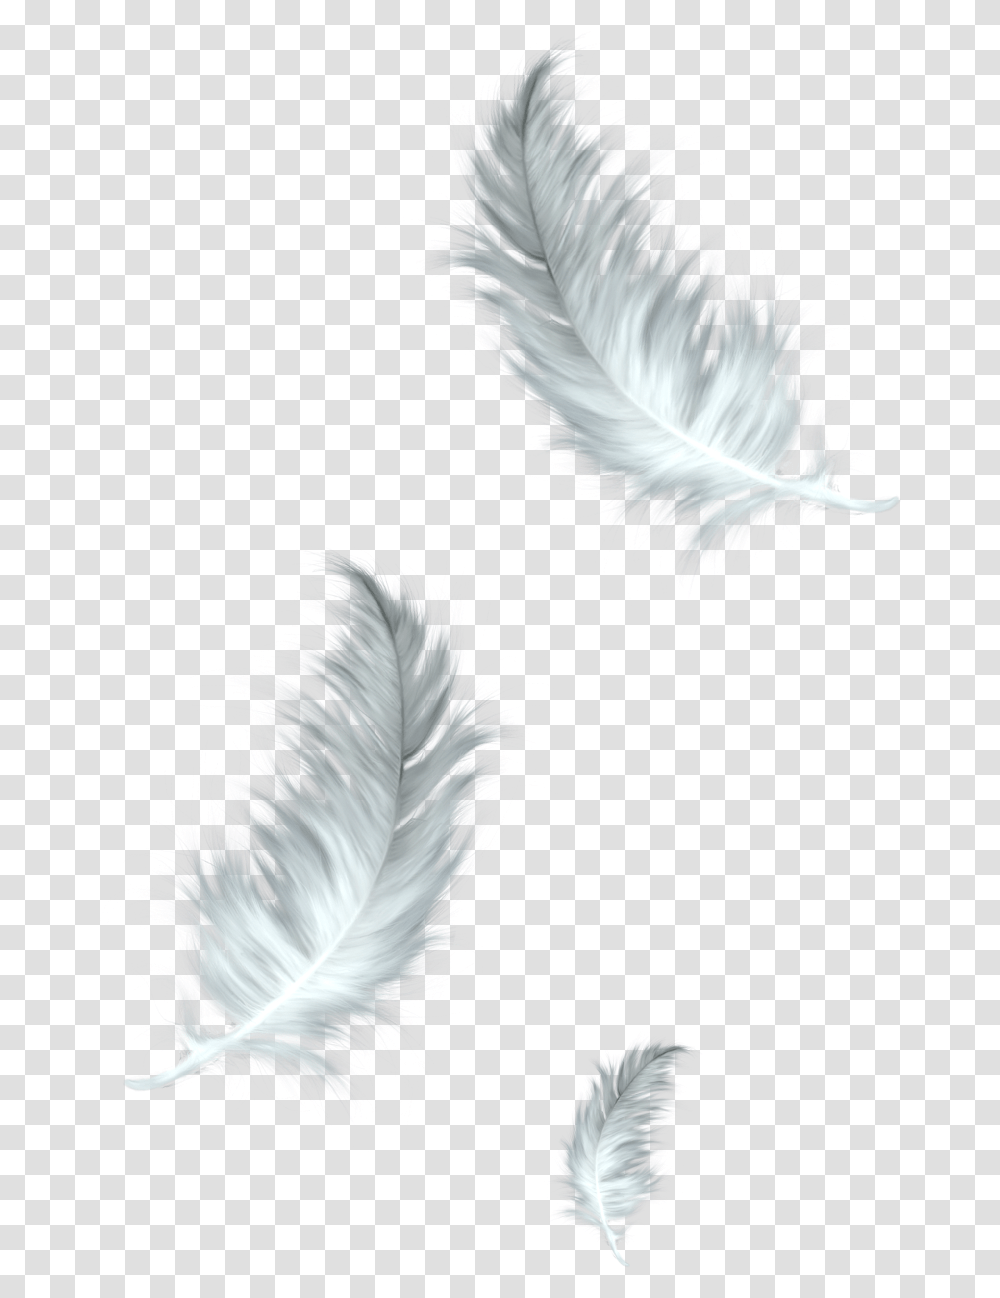 The Floating Feather Bird Clip Art Feathers Download Feathers, Nature, Outdoors, Fractal, Pattern Transparent Png